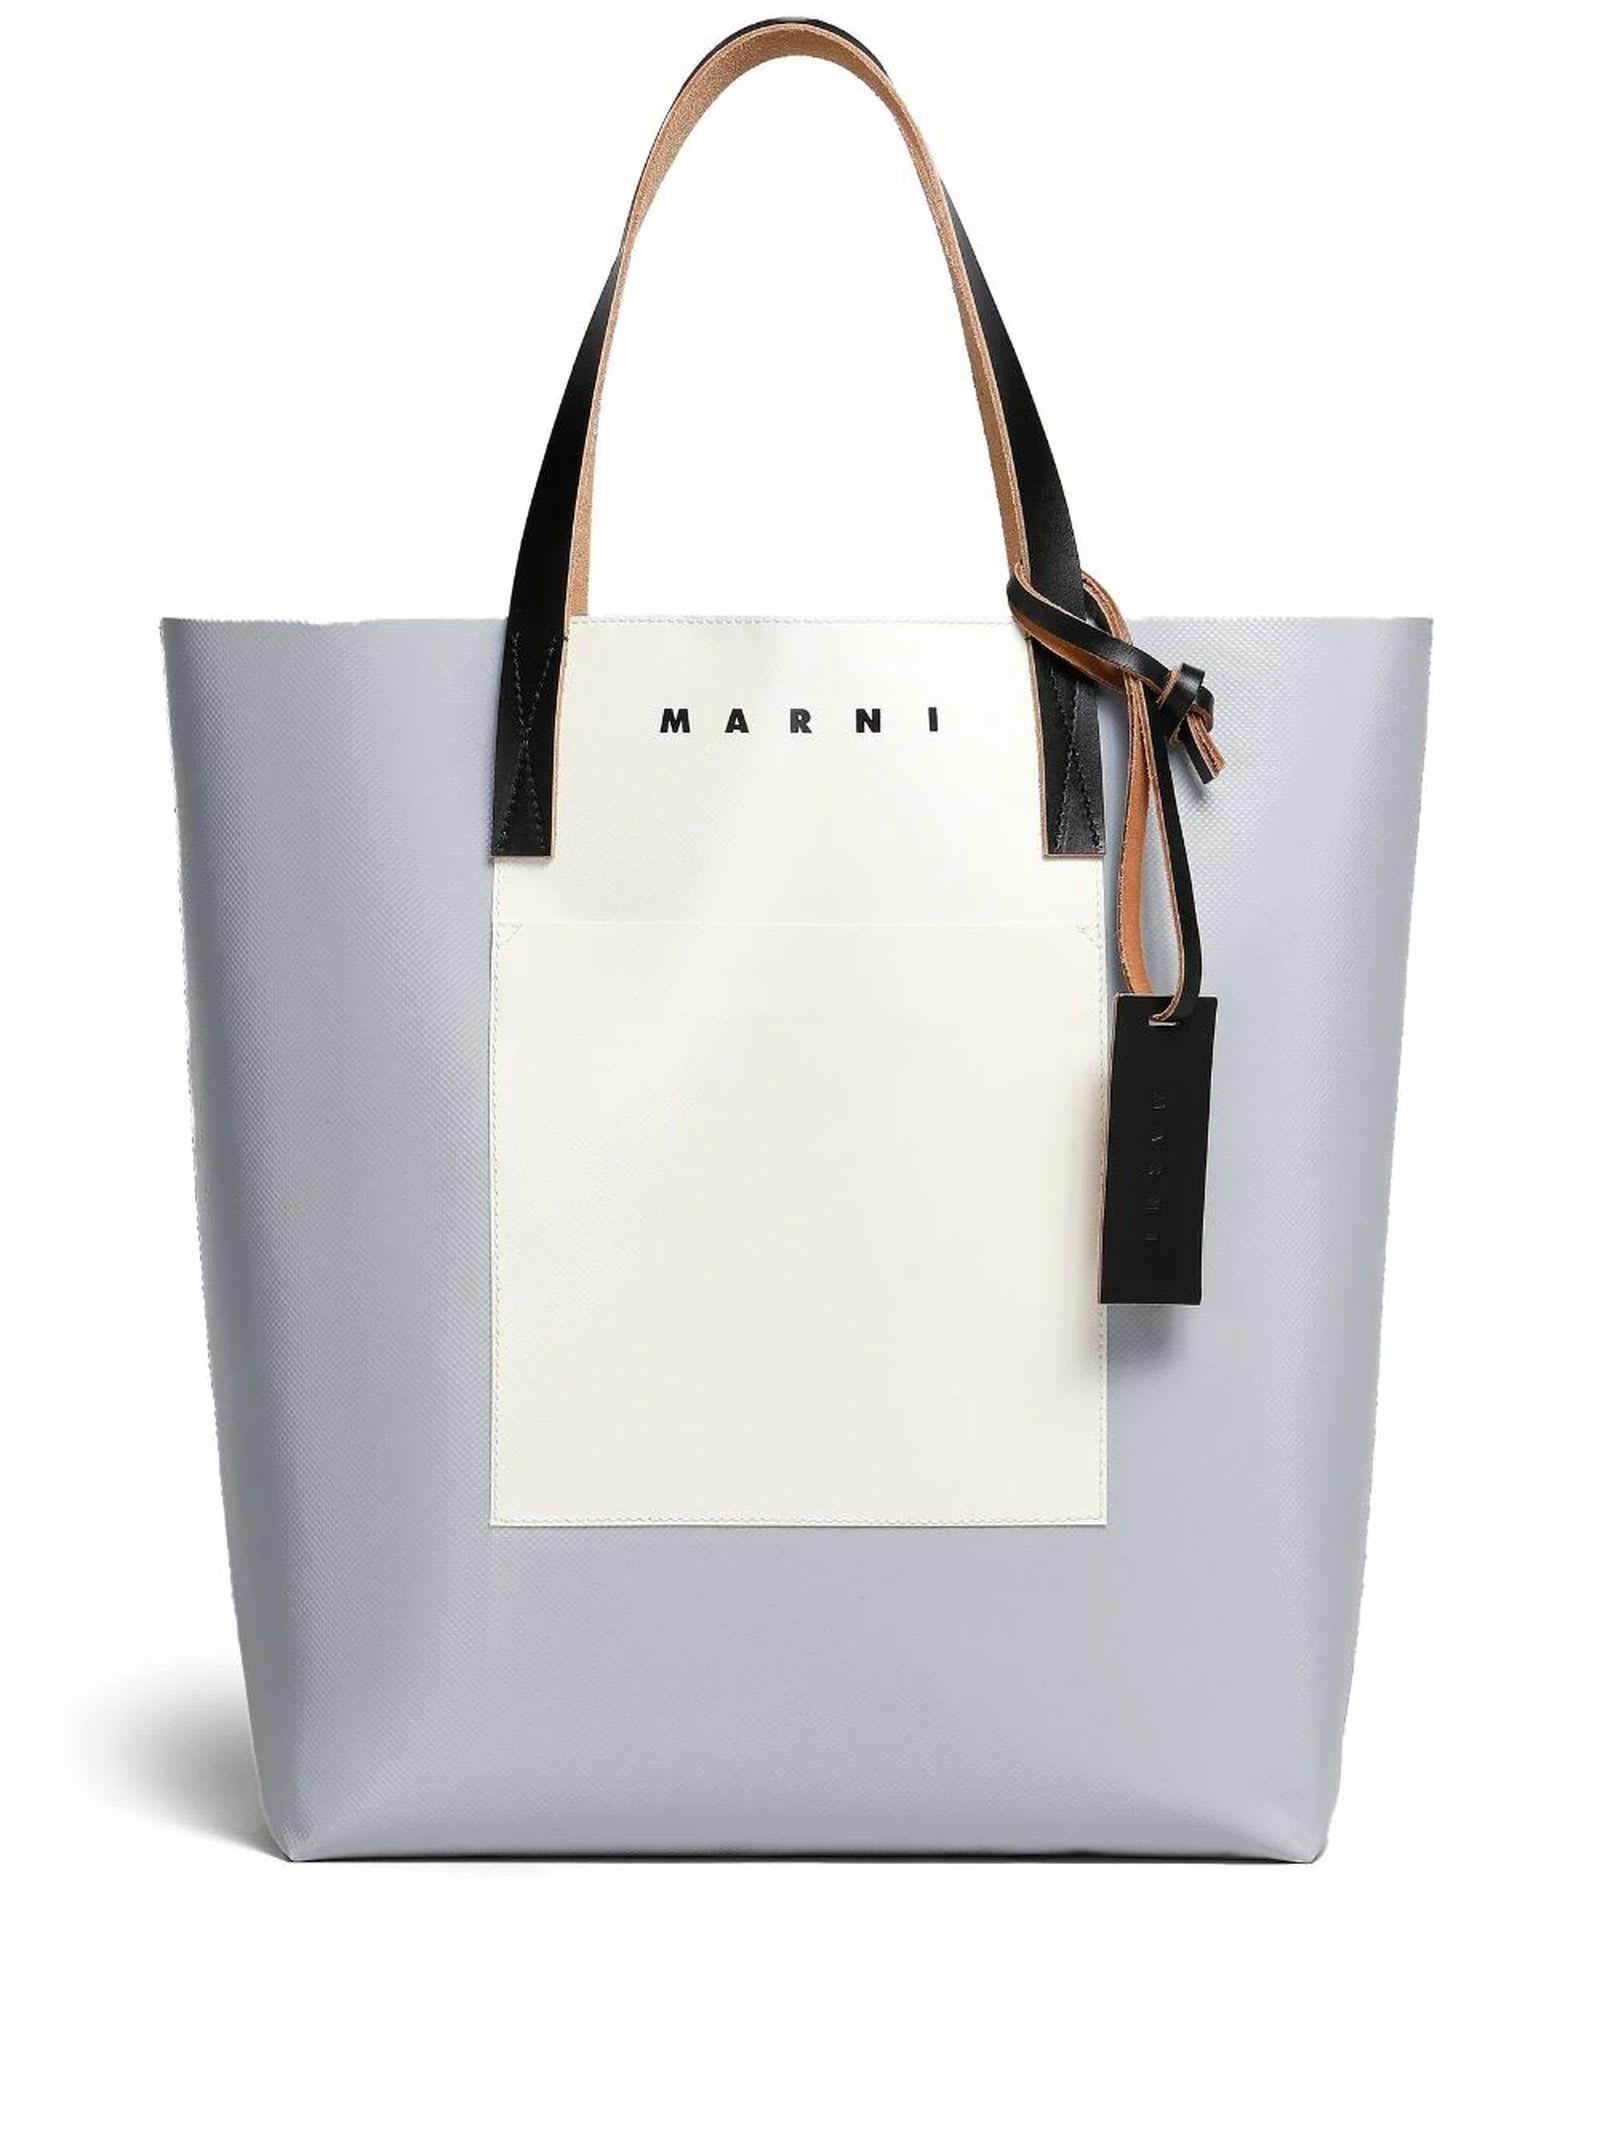 Marni Tribeca Shopping Bag In Silver And Beige